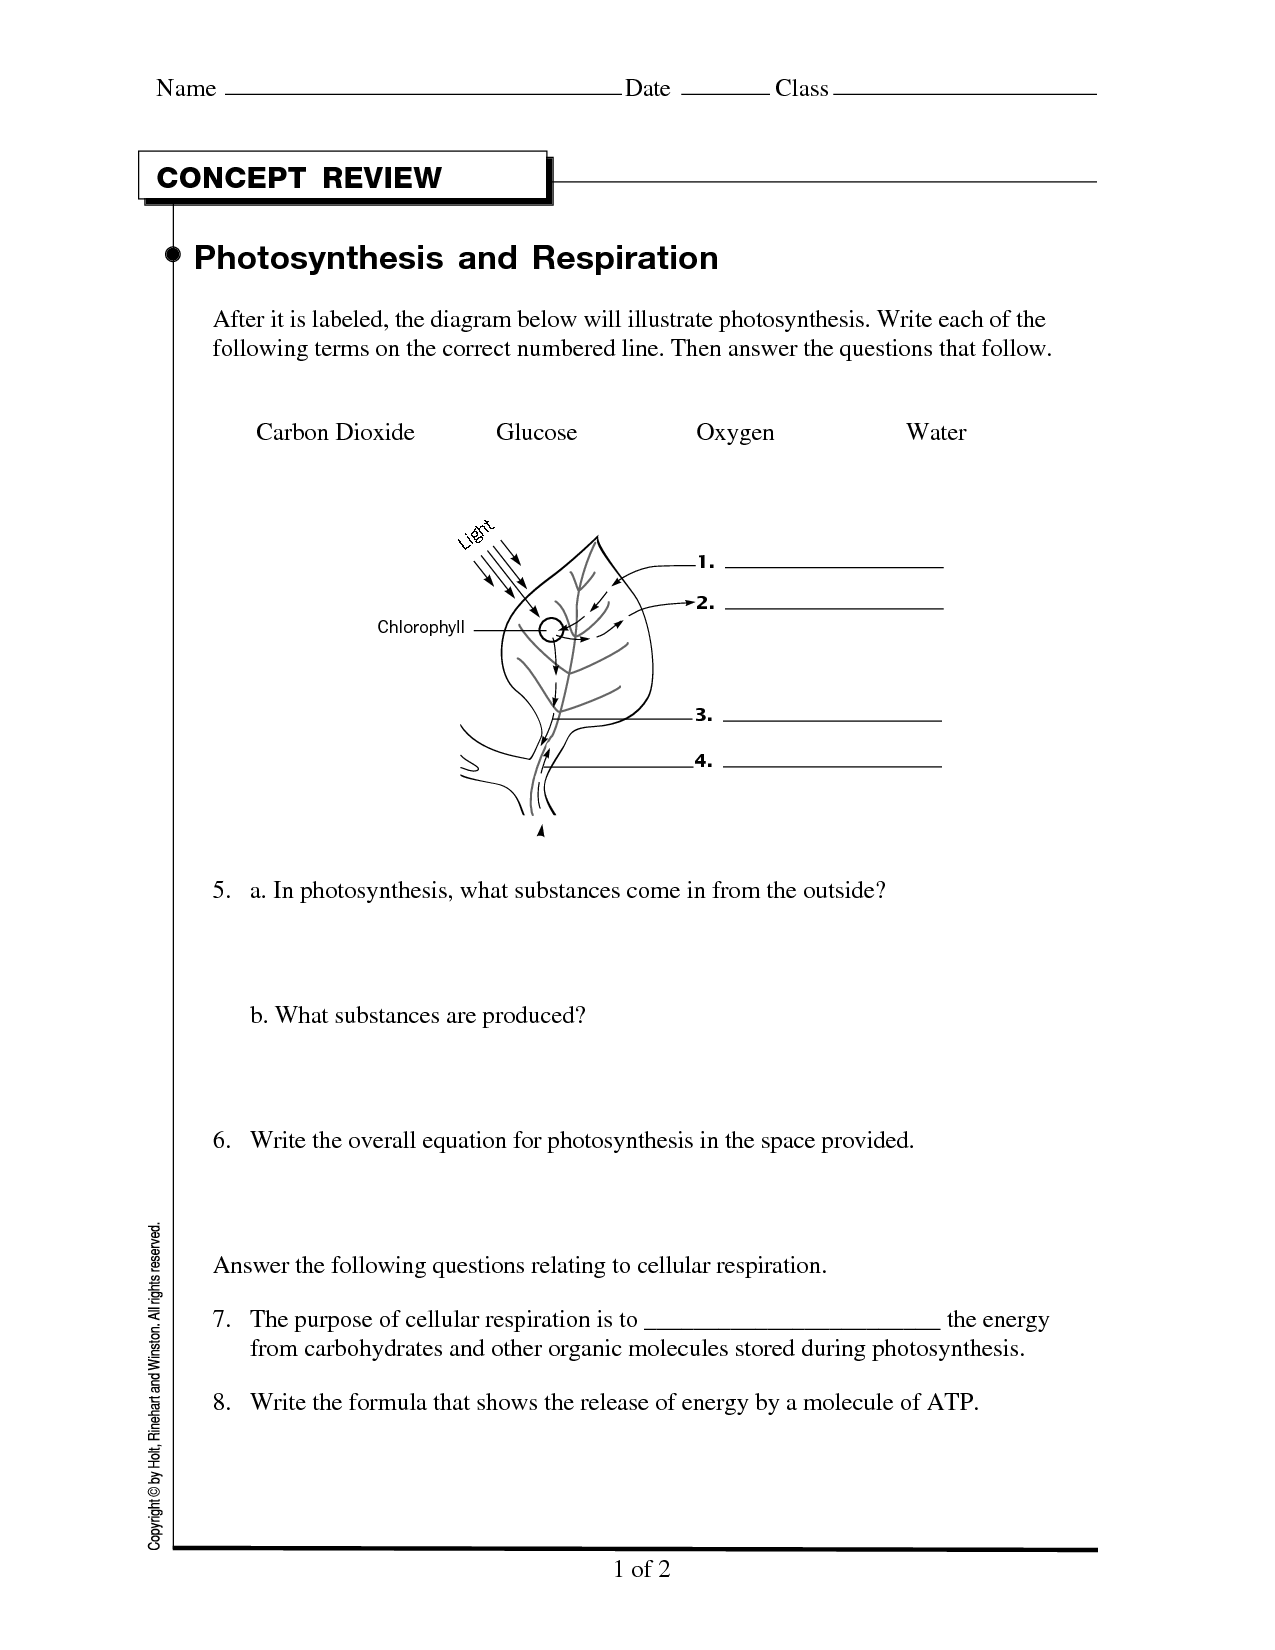 15-best-images-of-photosynthesis-lab-worksheet-photosynthesis